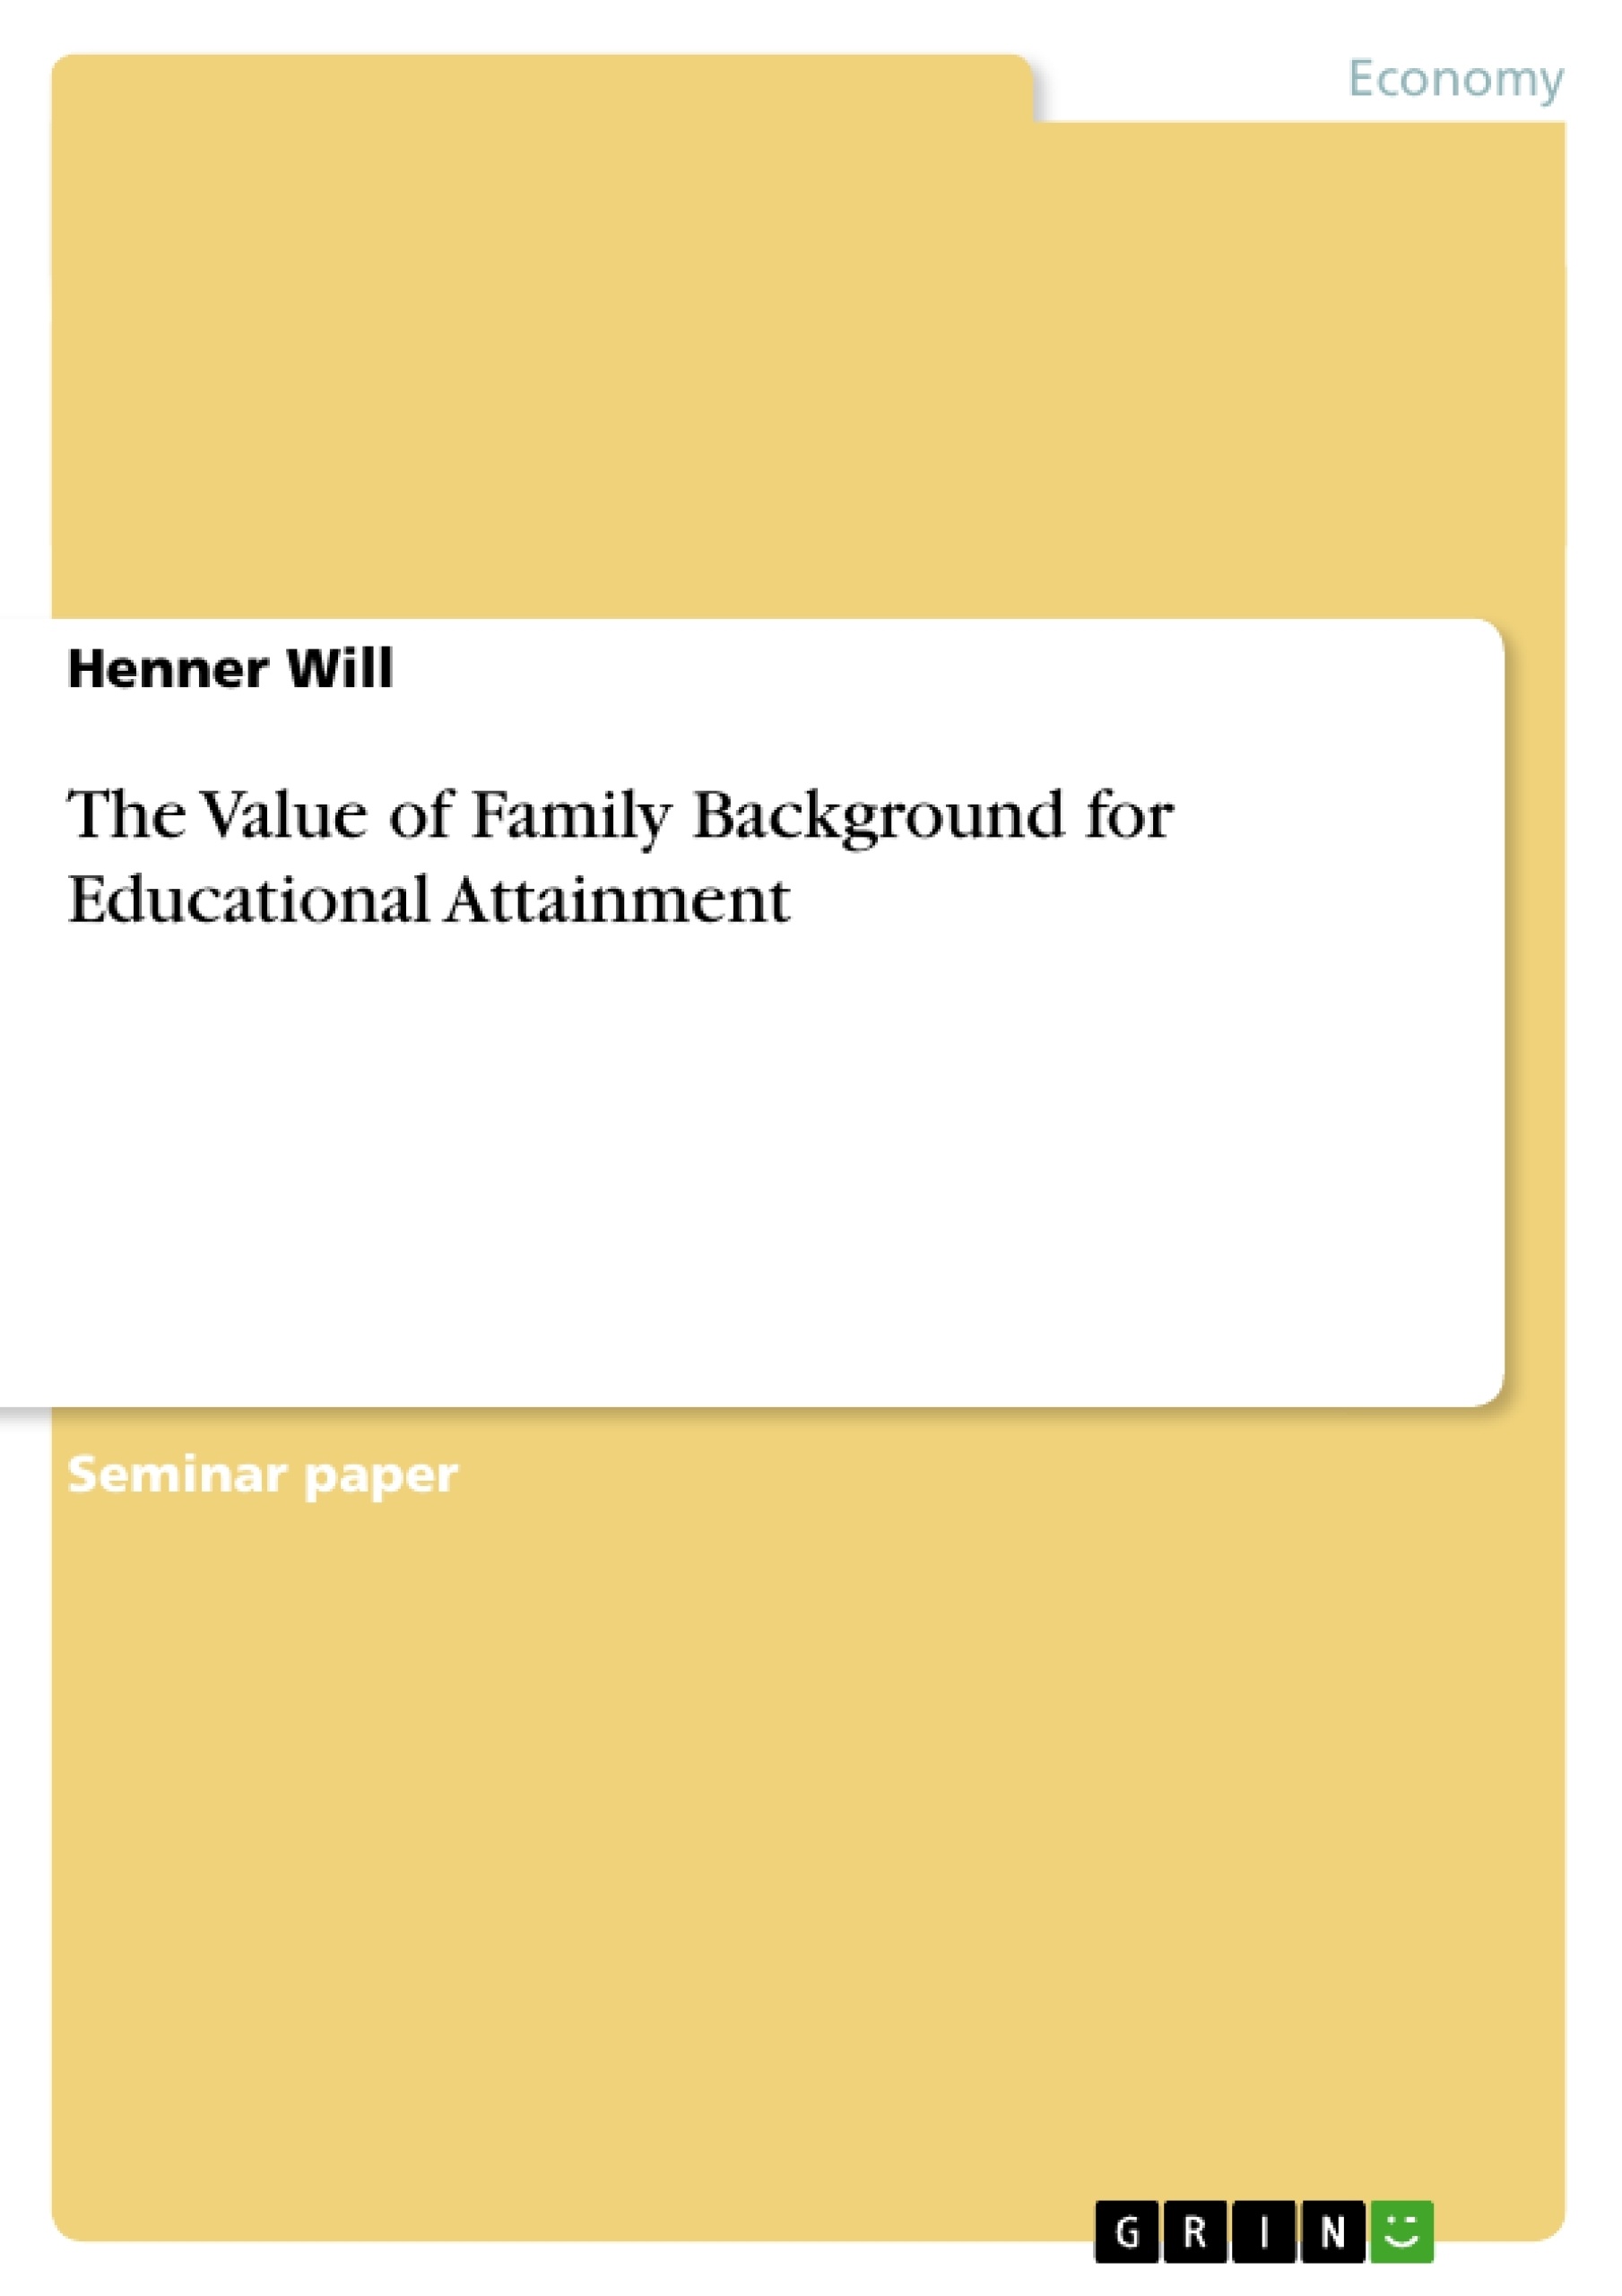 Title: The Value of Family Background for Educational Attainment 